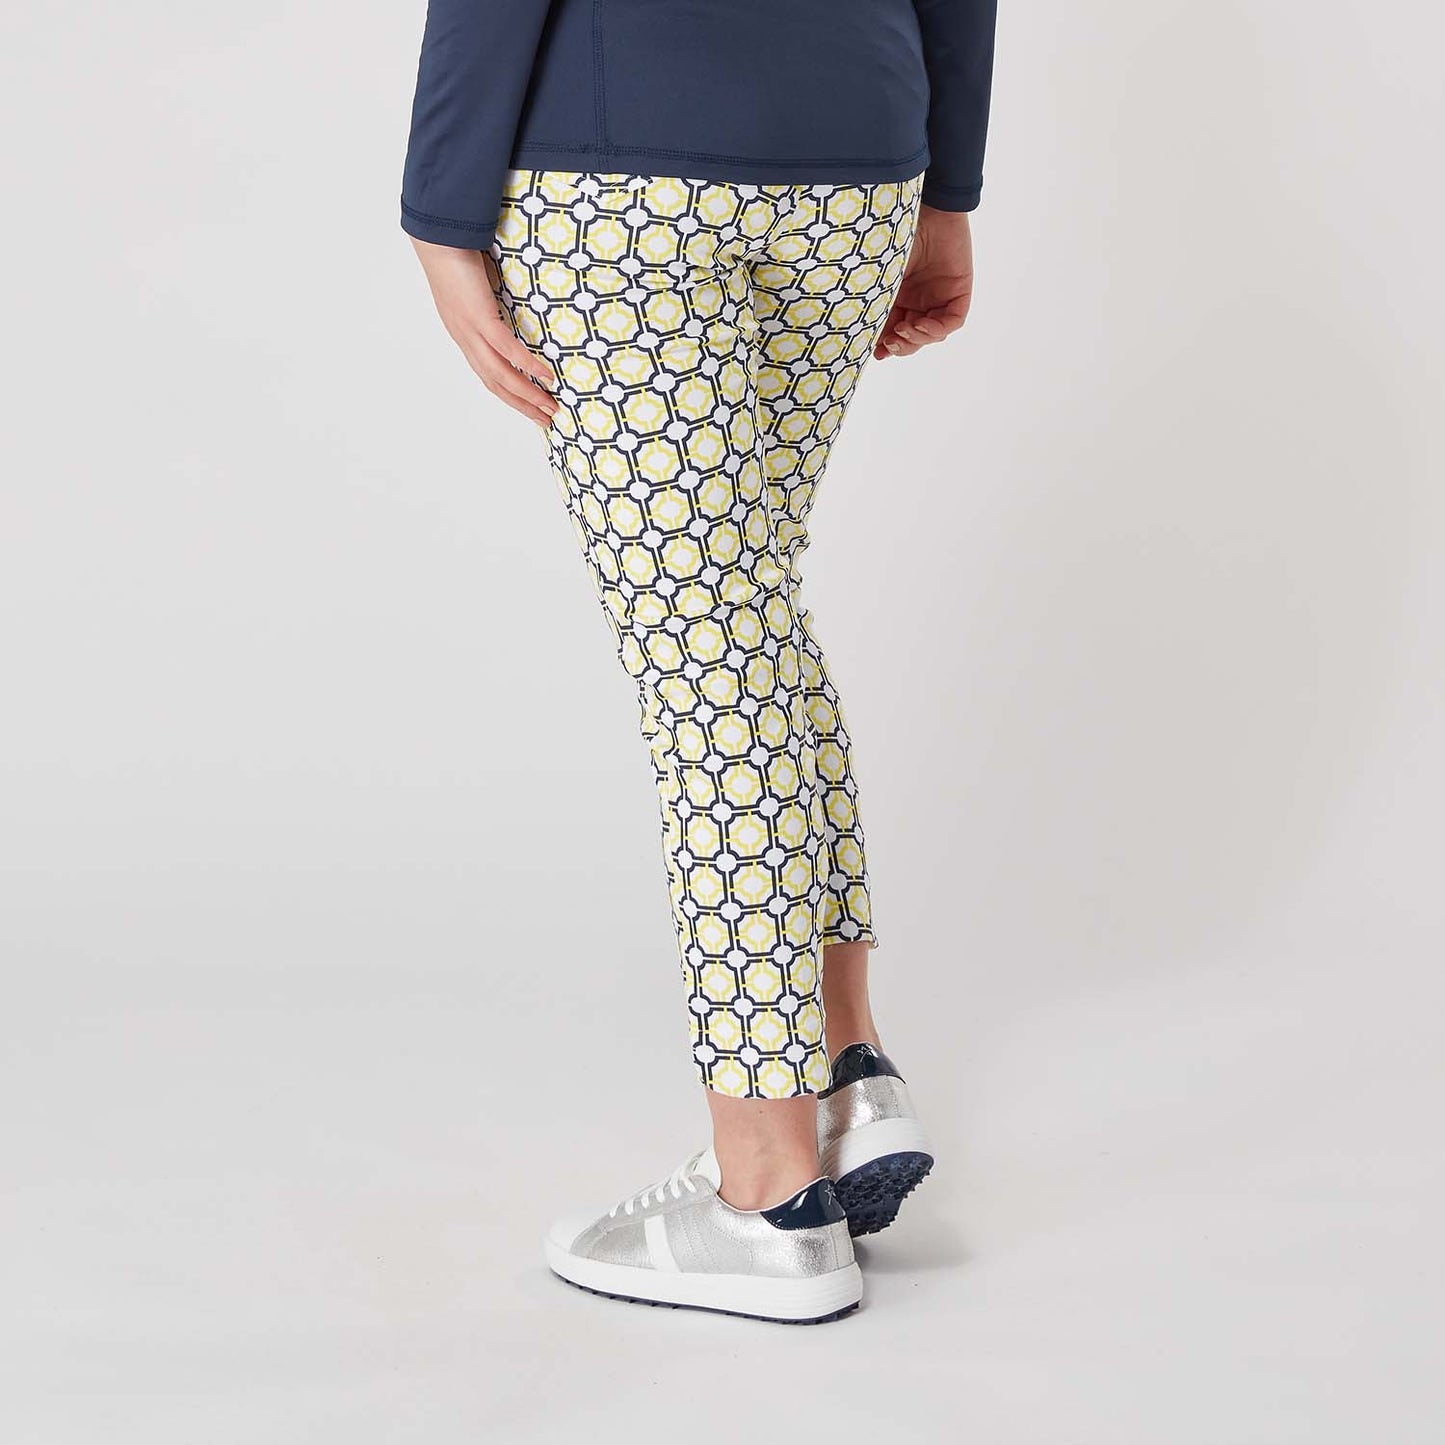 Swing Out Sister Ladies Sunshine and Navy Mosaic Pattern 7/8 Trousers	